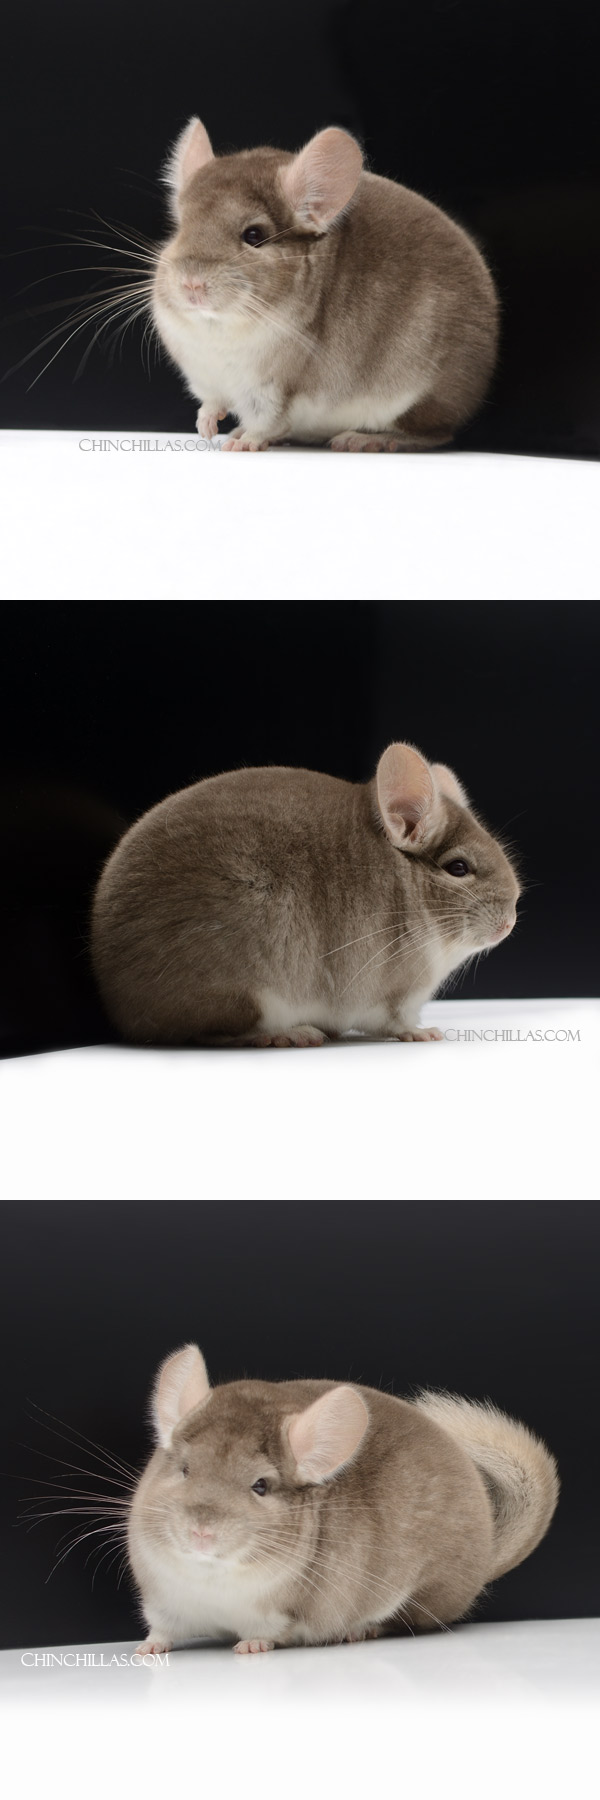 Chinchilla or related item offered for sale or export on Chinchillas.com - 22040 Show Quality Beige Male Chinchilla